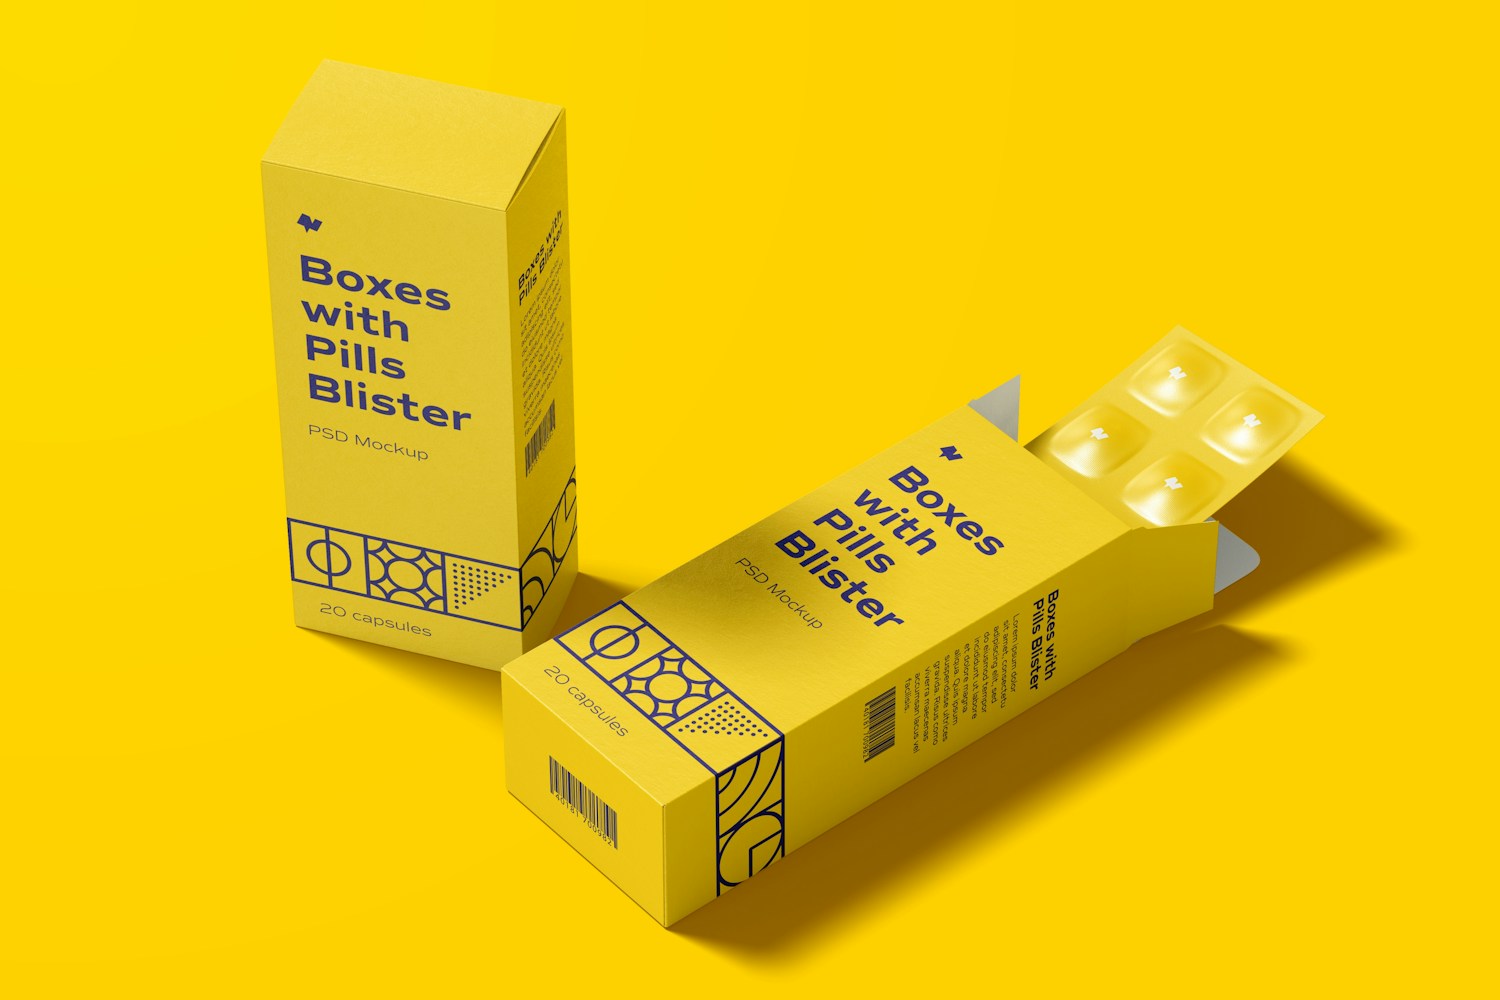 Boxes with Pills Blister Mockup, Standing and Dropped